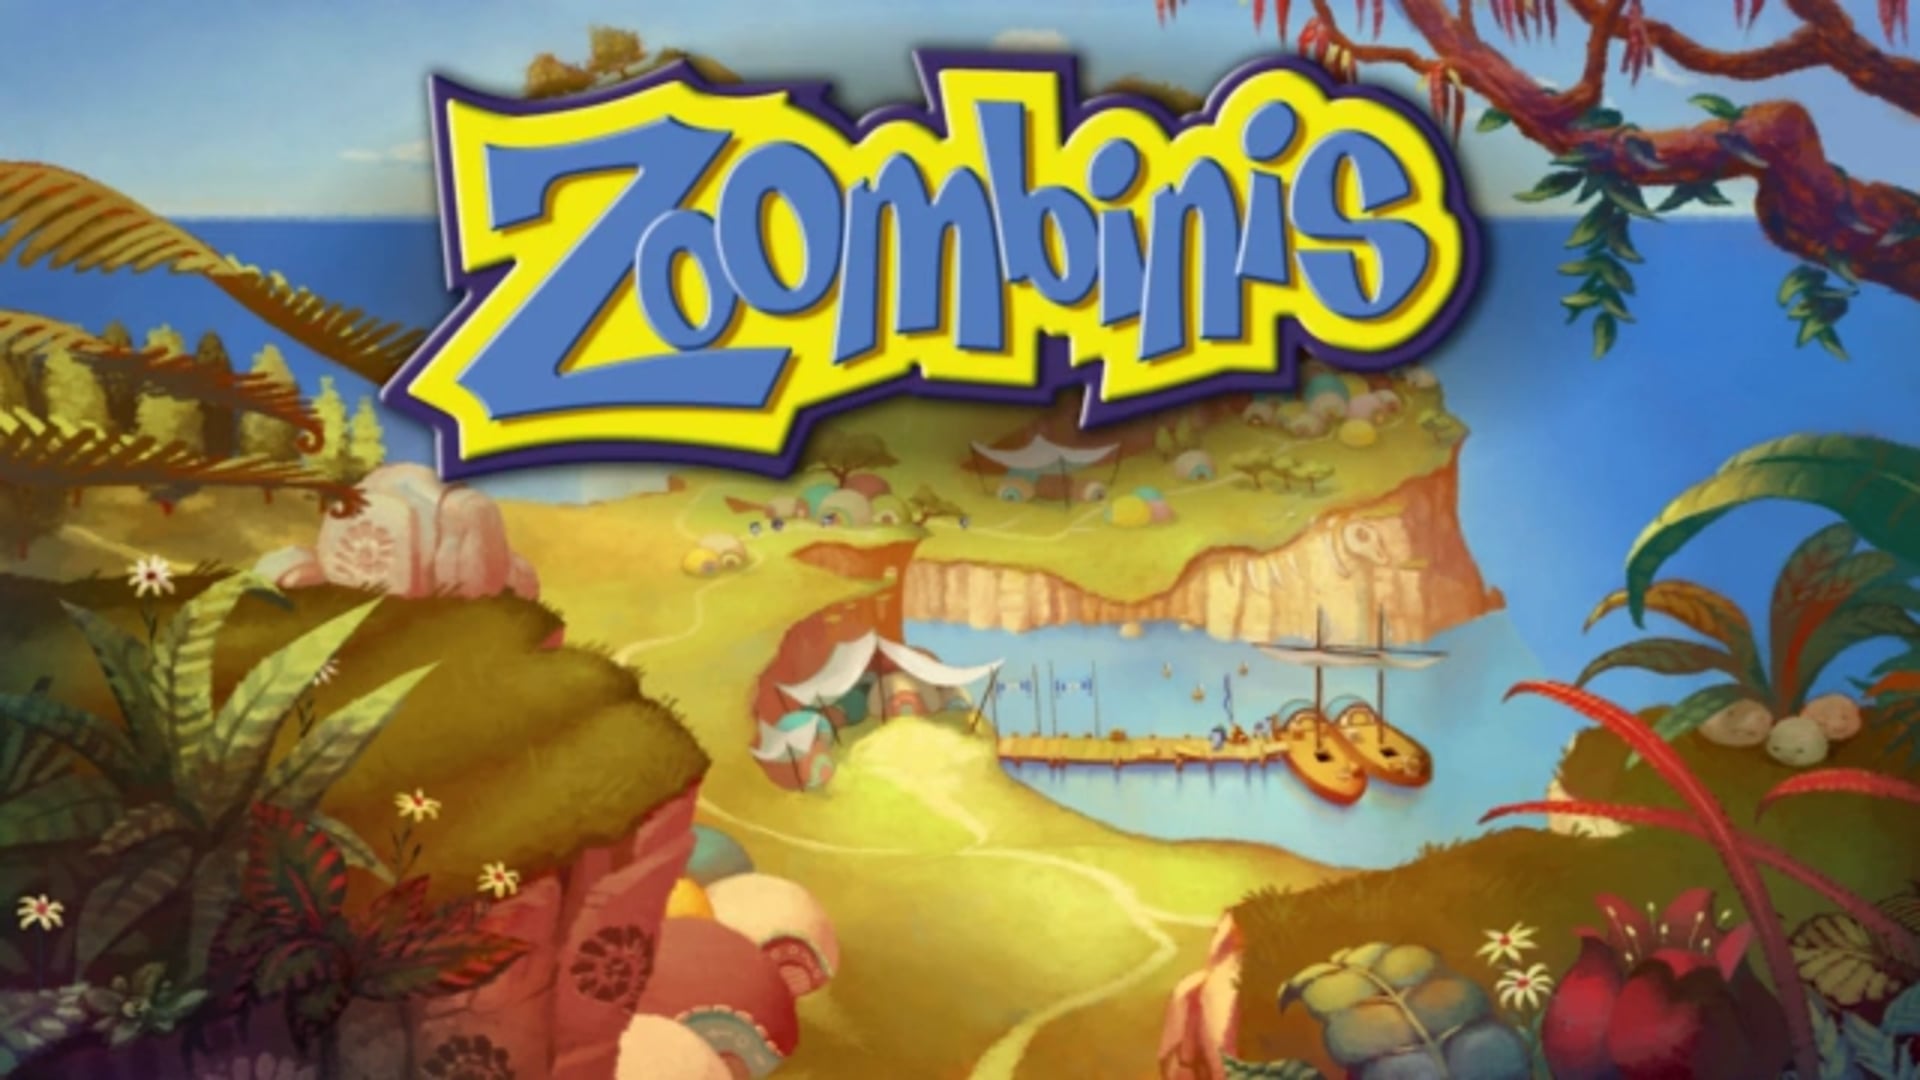 FableVision Studios: The Remastering of Zoombinis